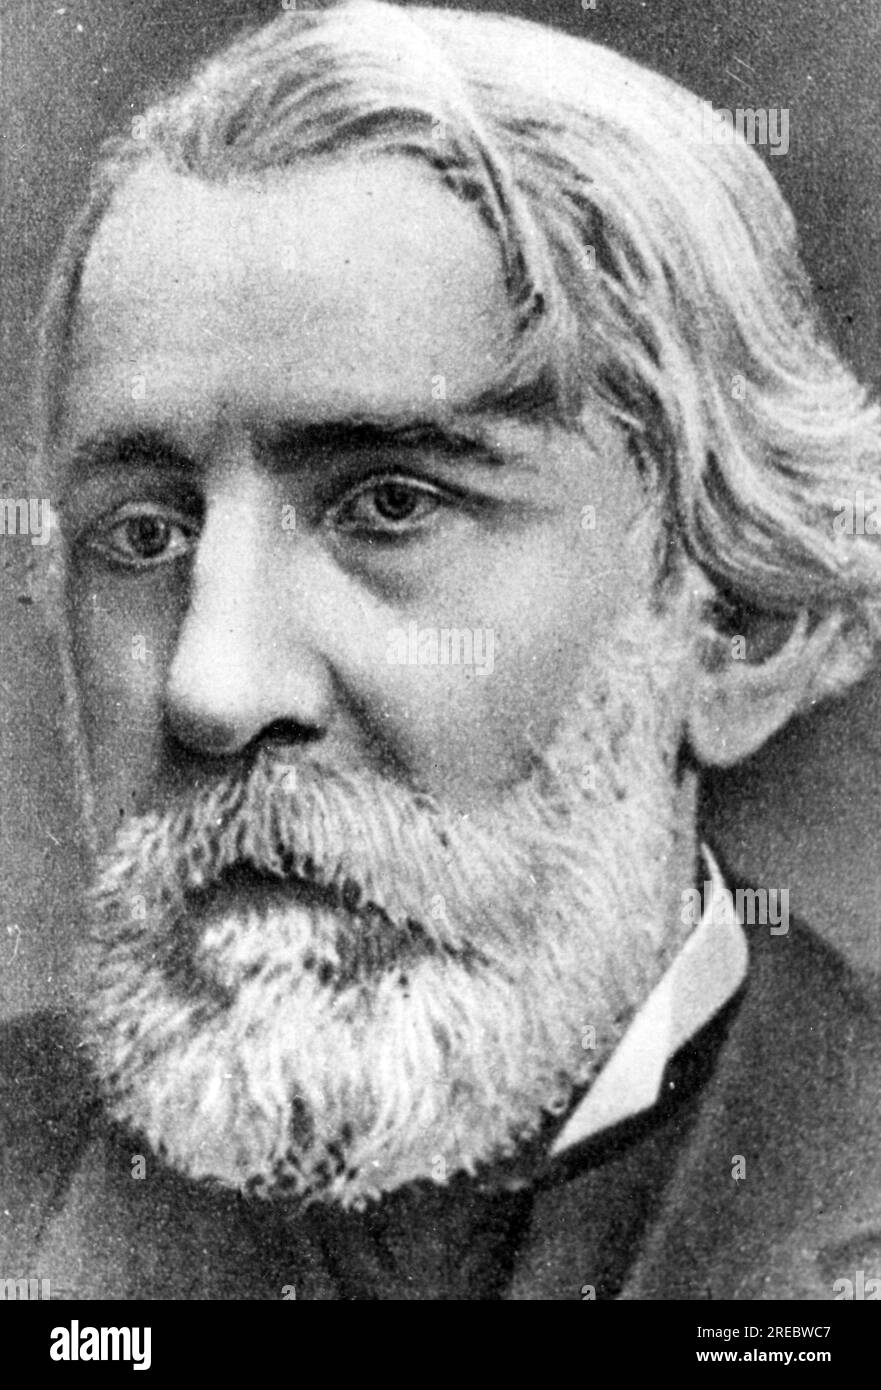 Turgenev, Ivan Sergeyevich, 9.11.1818 - 3.9.1883, Russian writer, circa 1875, ADDITIONAL-RIGHTS-CLEARANCE-INFO-NOT-AVAILABLE Stock Photo